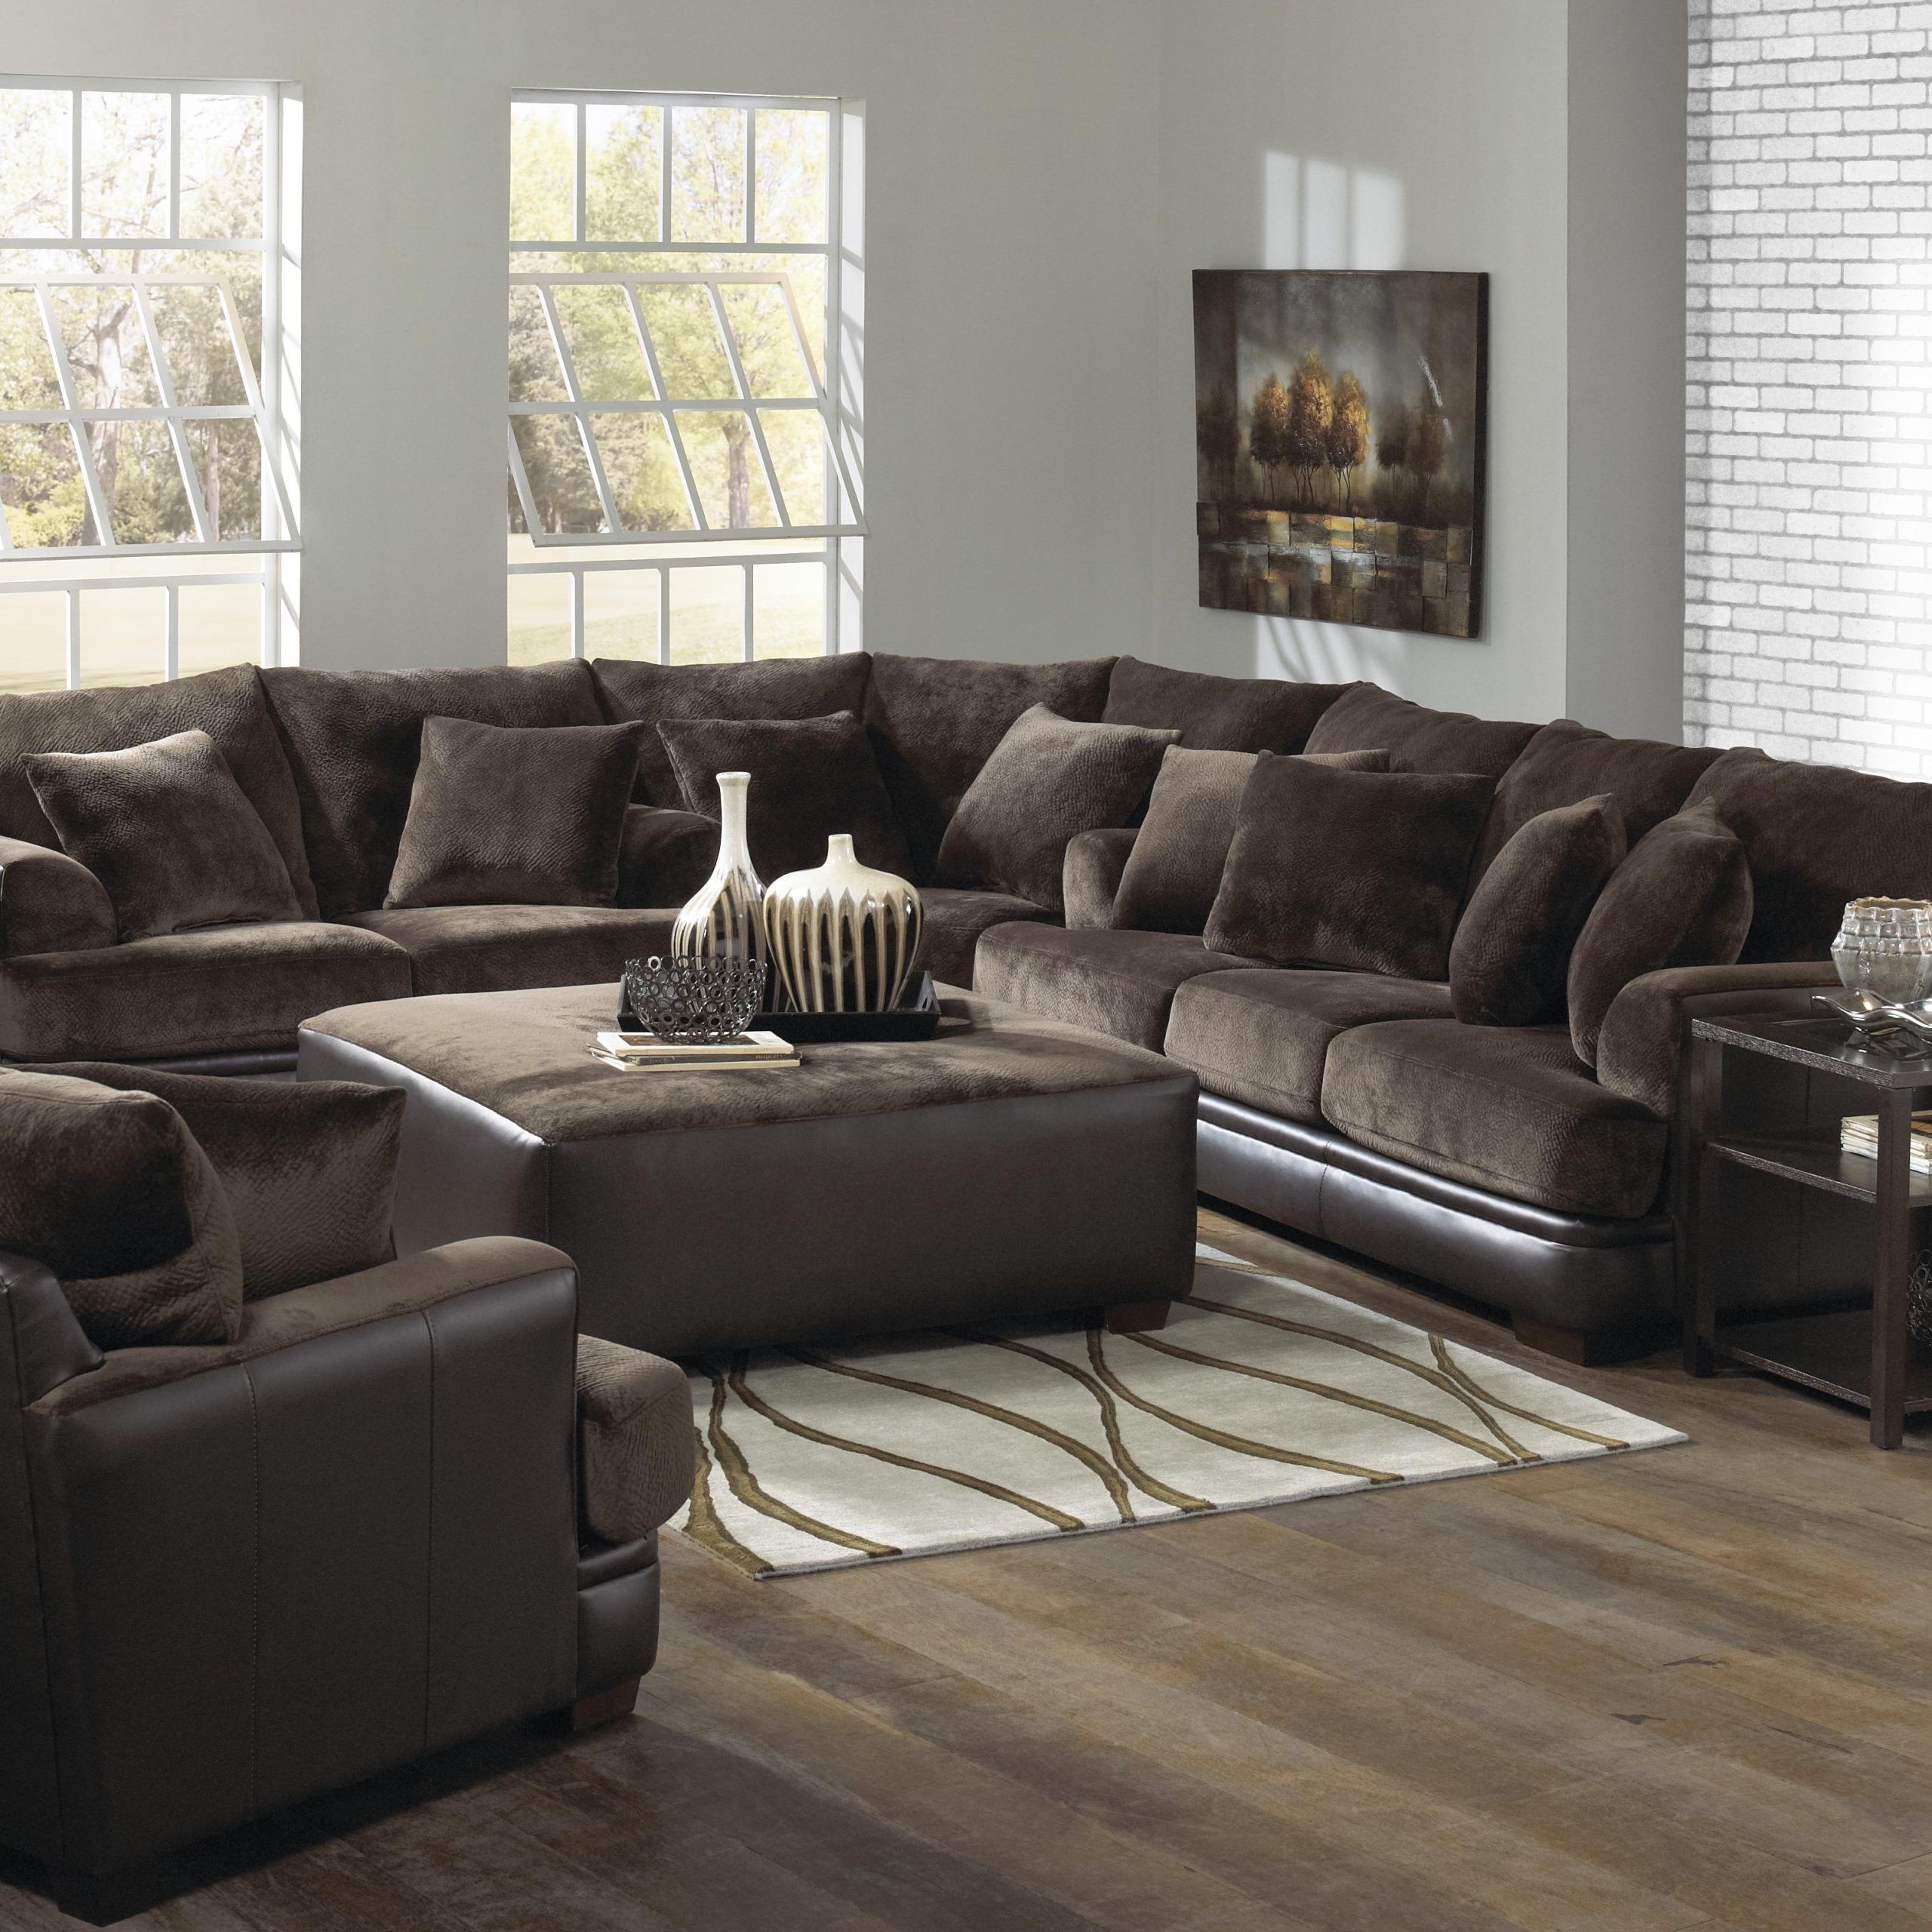 U Shaped Sectional With Chaise Design – Homesfeed Throughout Trendy Modern U Shaped Sectional Couch Sets (View 15 of 15)